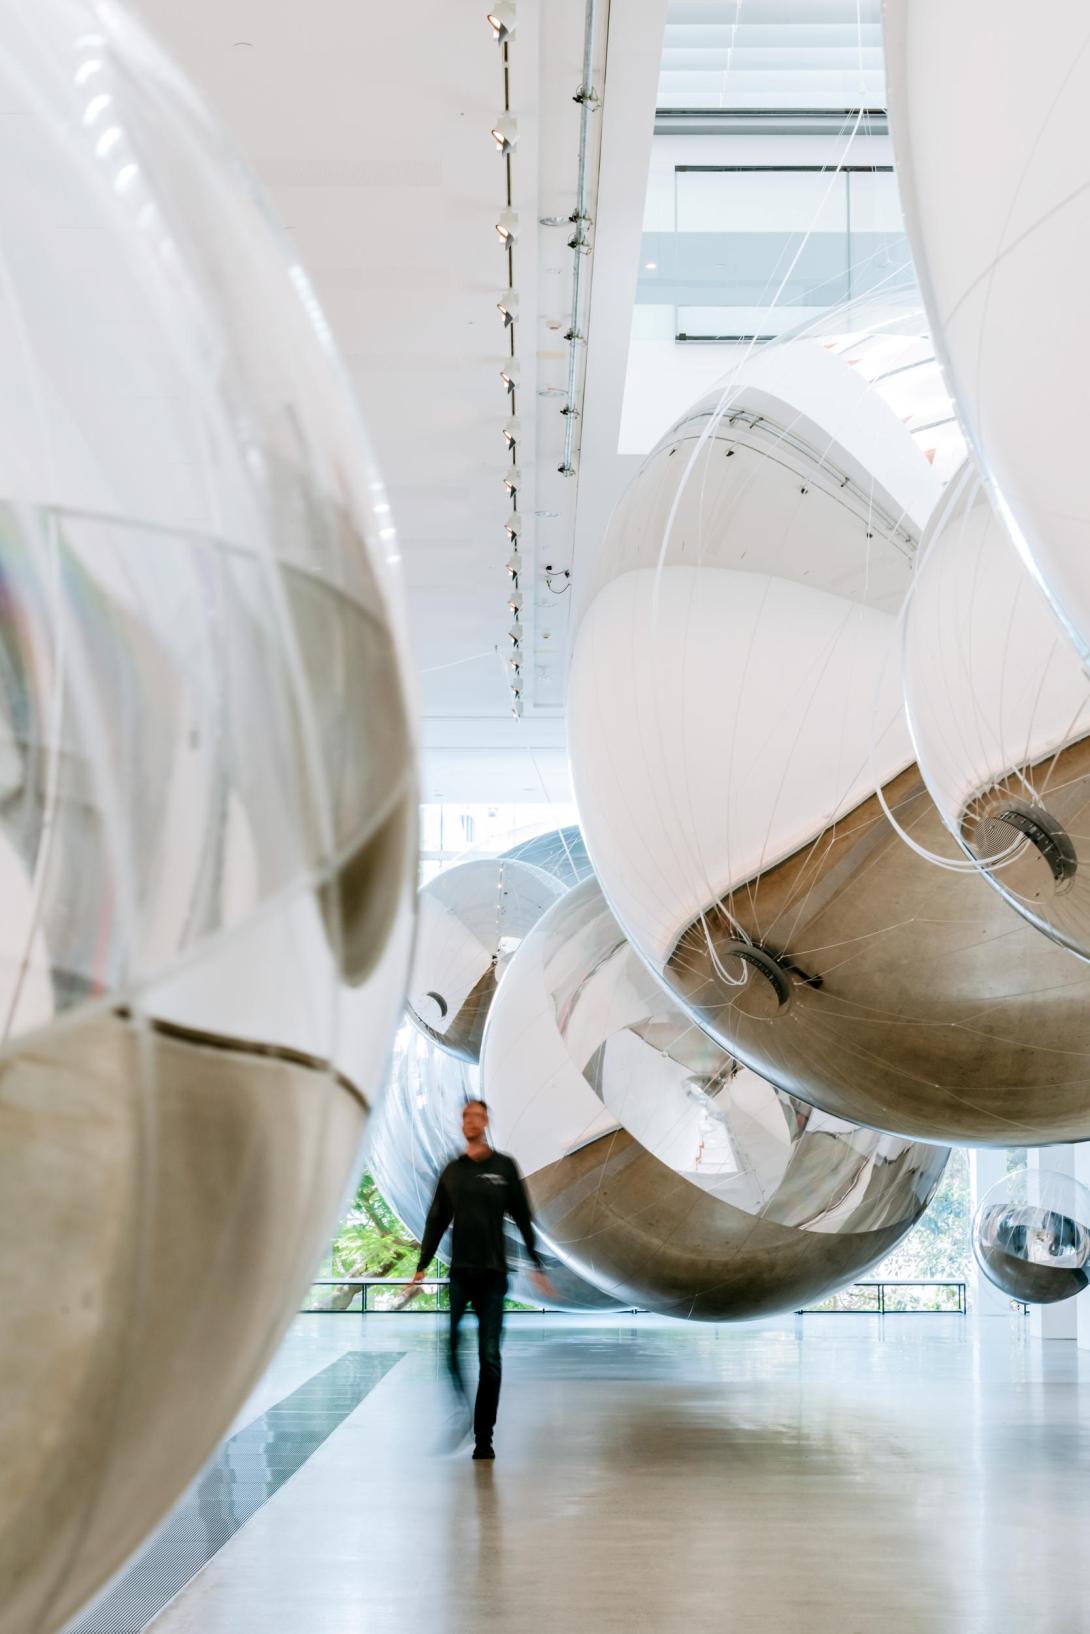 An installation view of enormous silver spheres suspended in a gallery space, with visitors looking on.